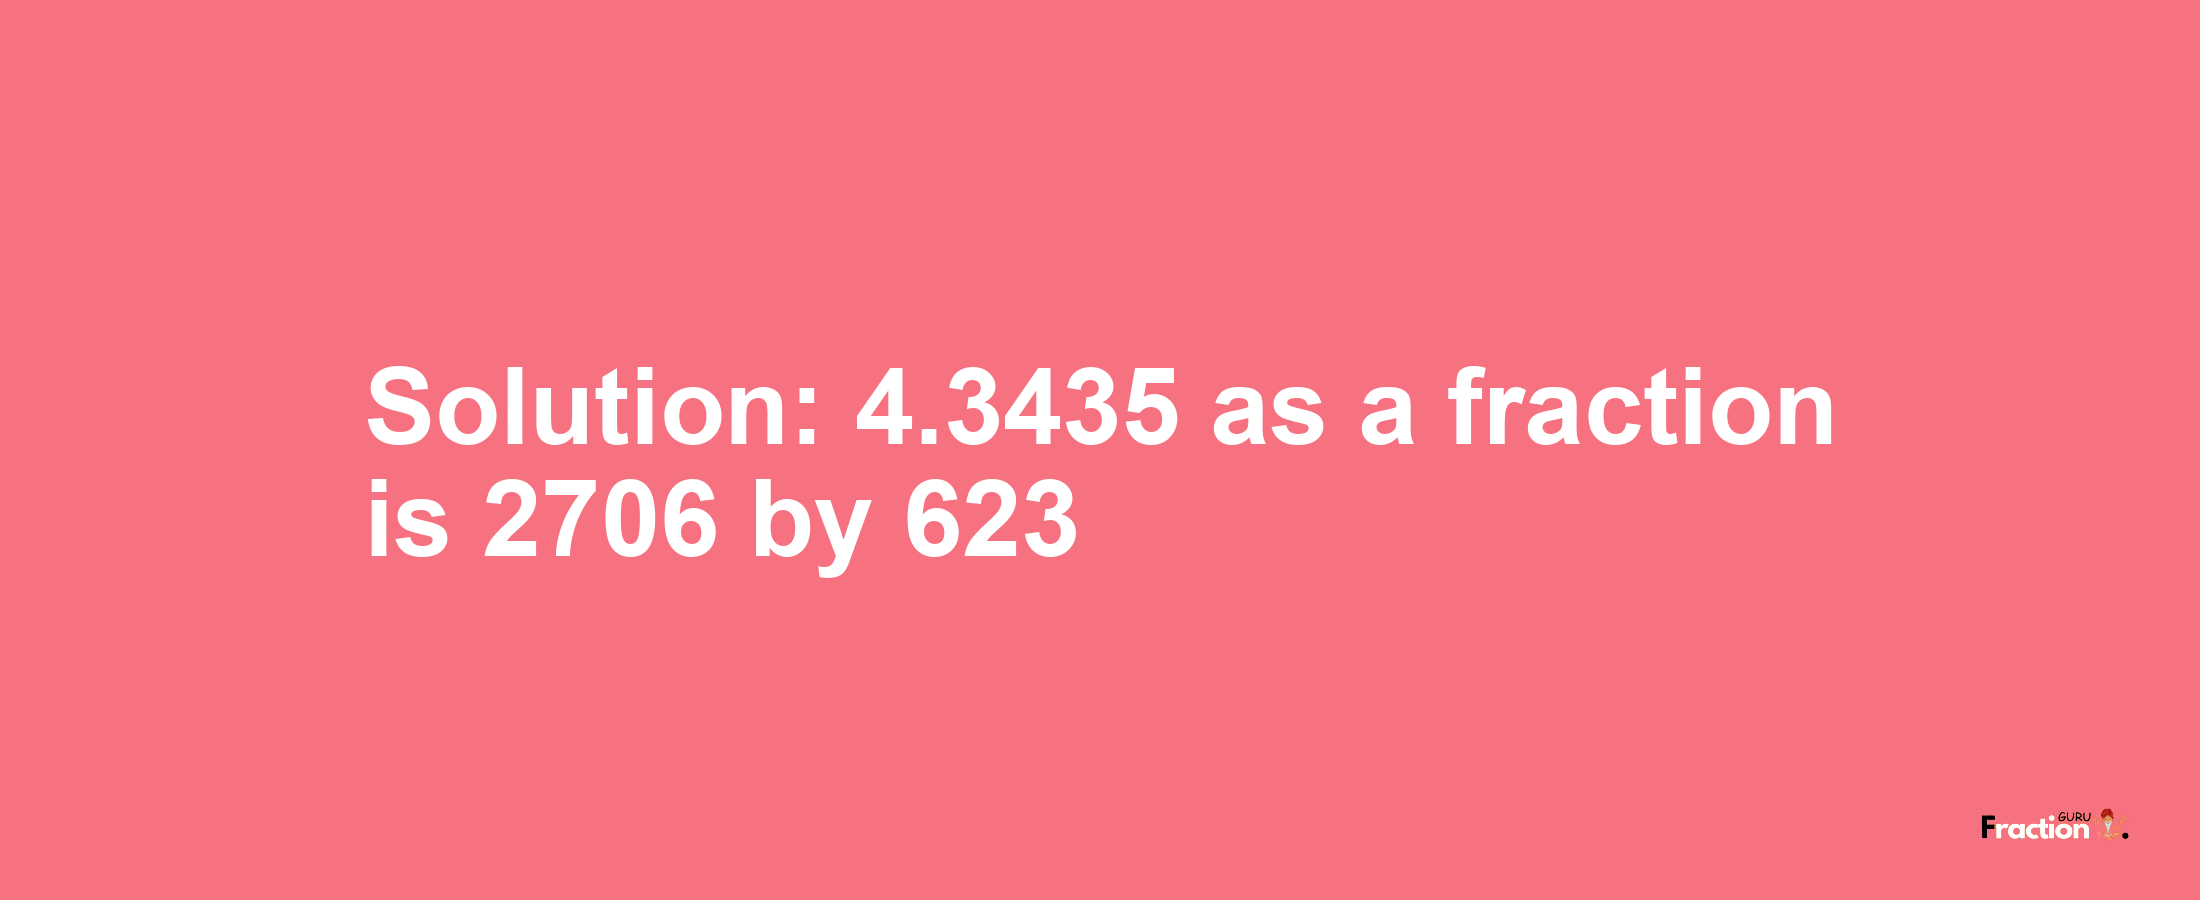 Solution:4.3435 as a fraction is 2706/623